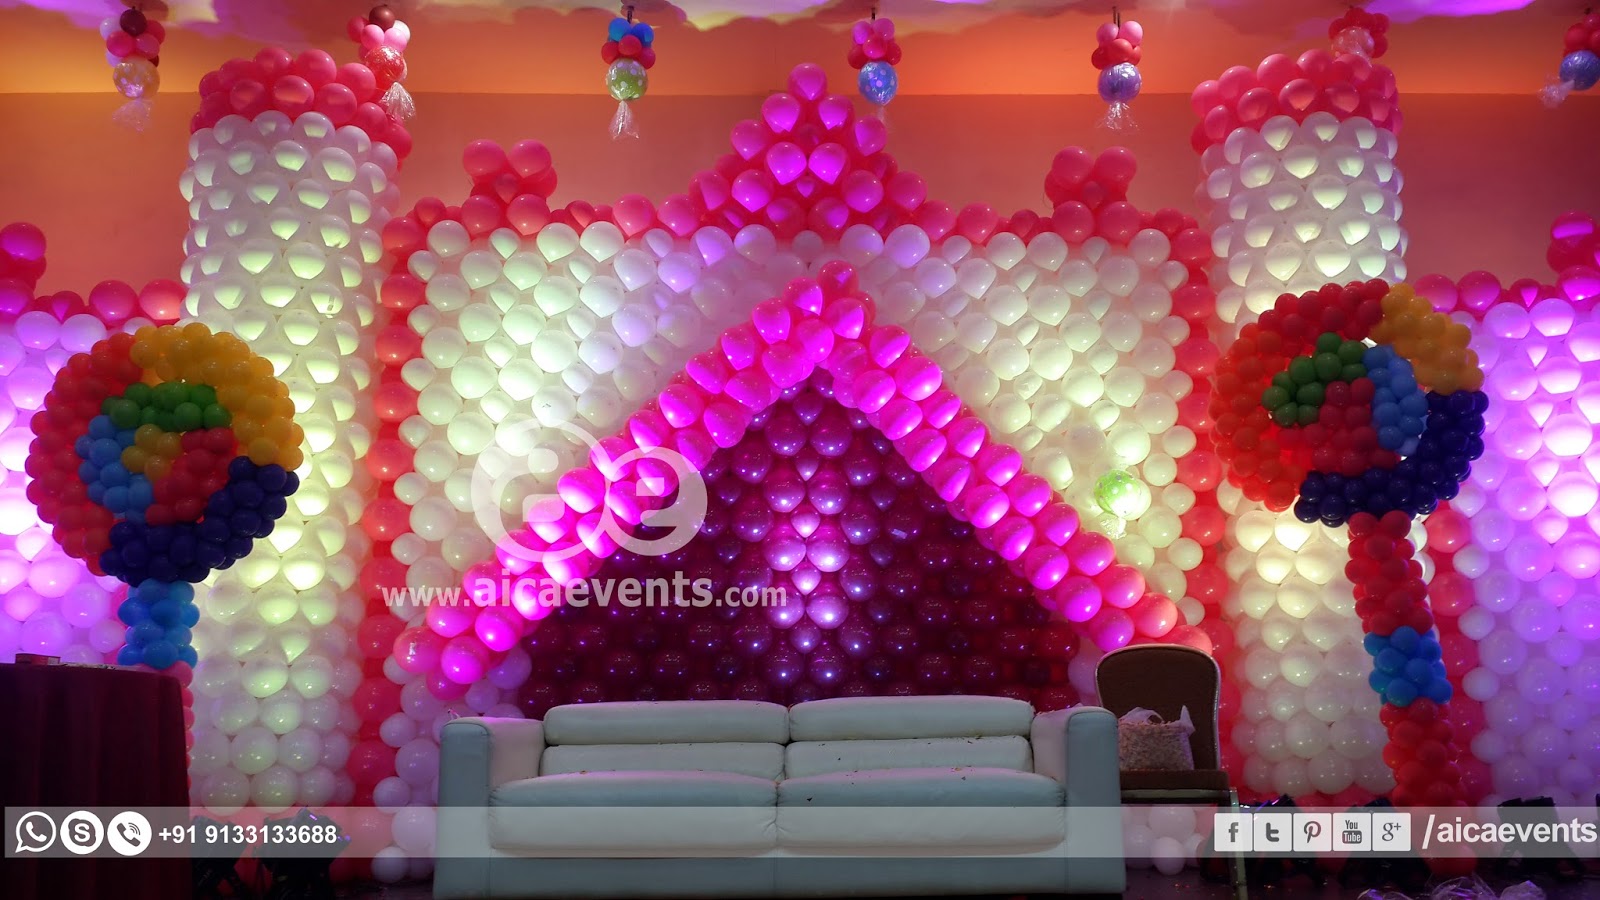 aicaevents Castle with Balloon  Wall Decoration 